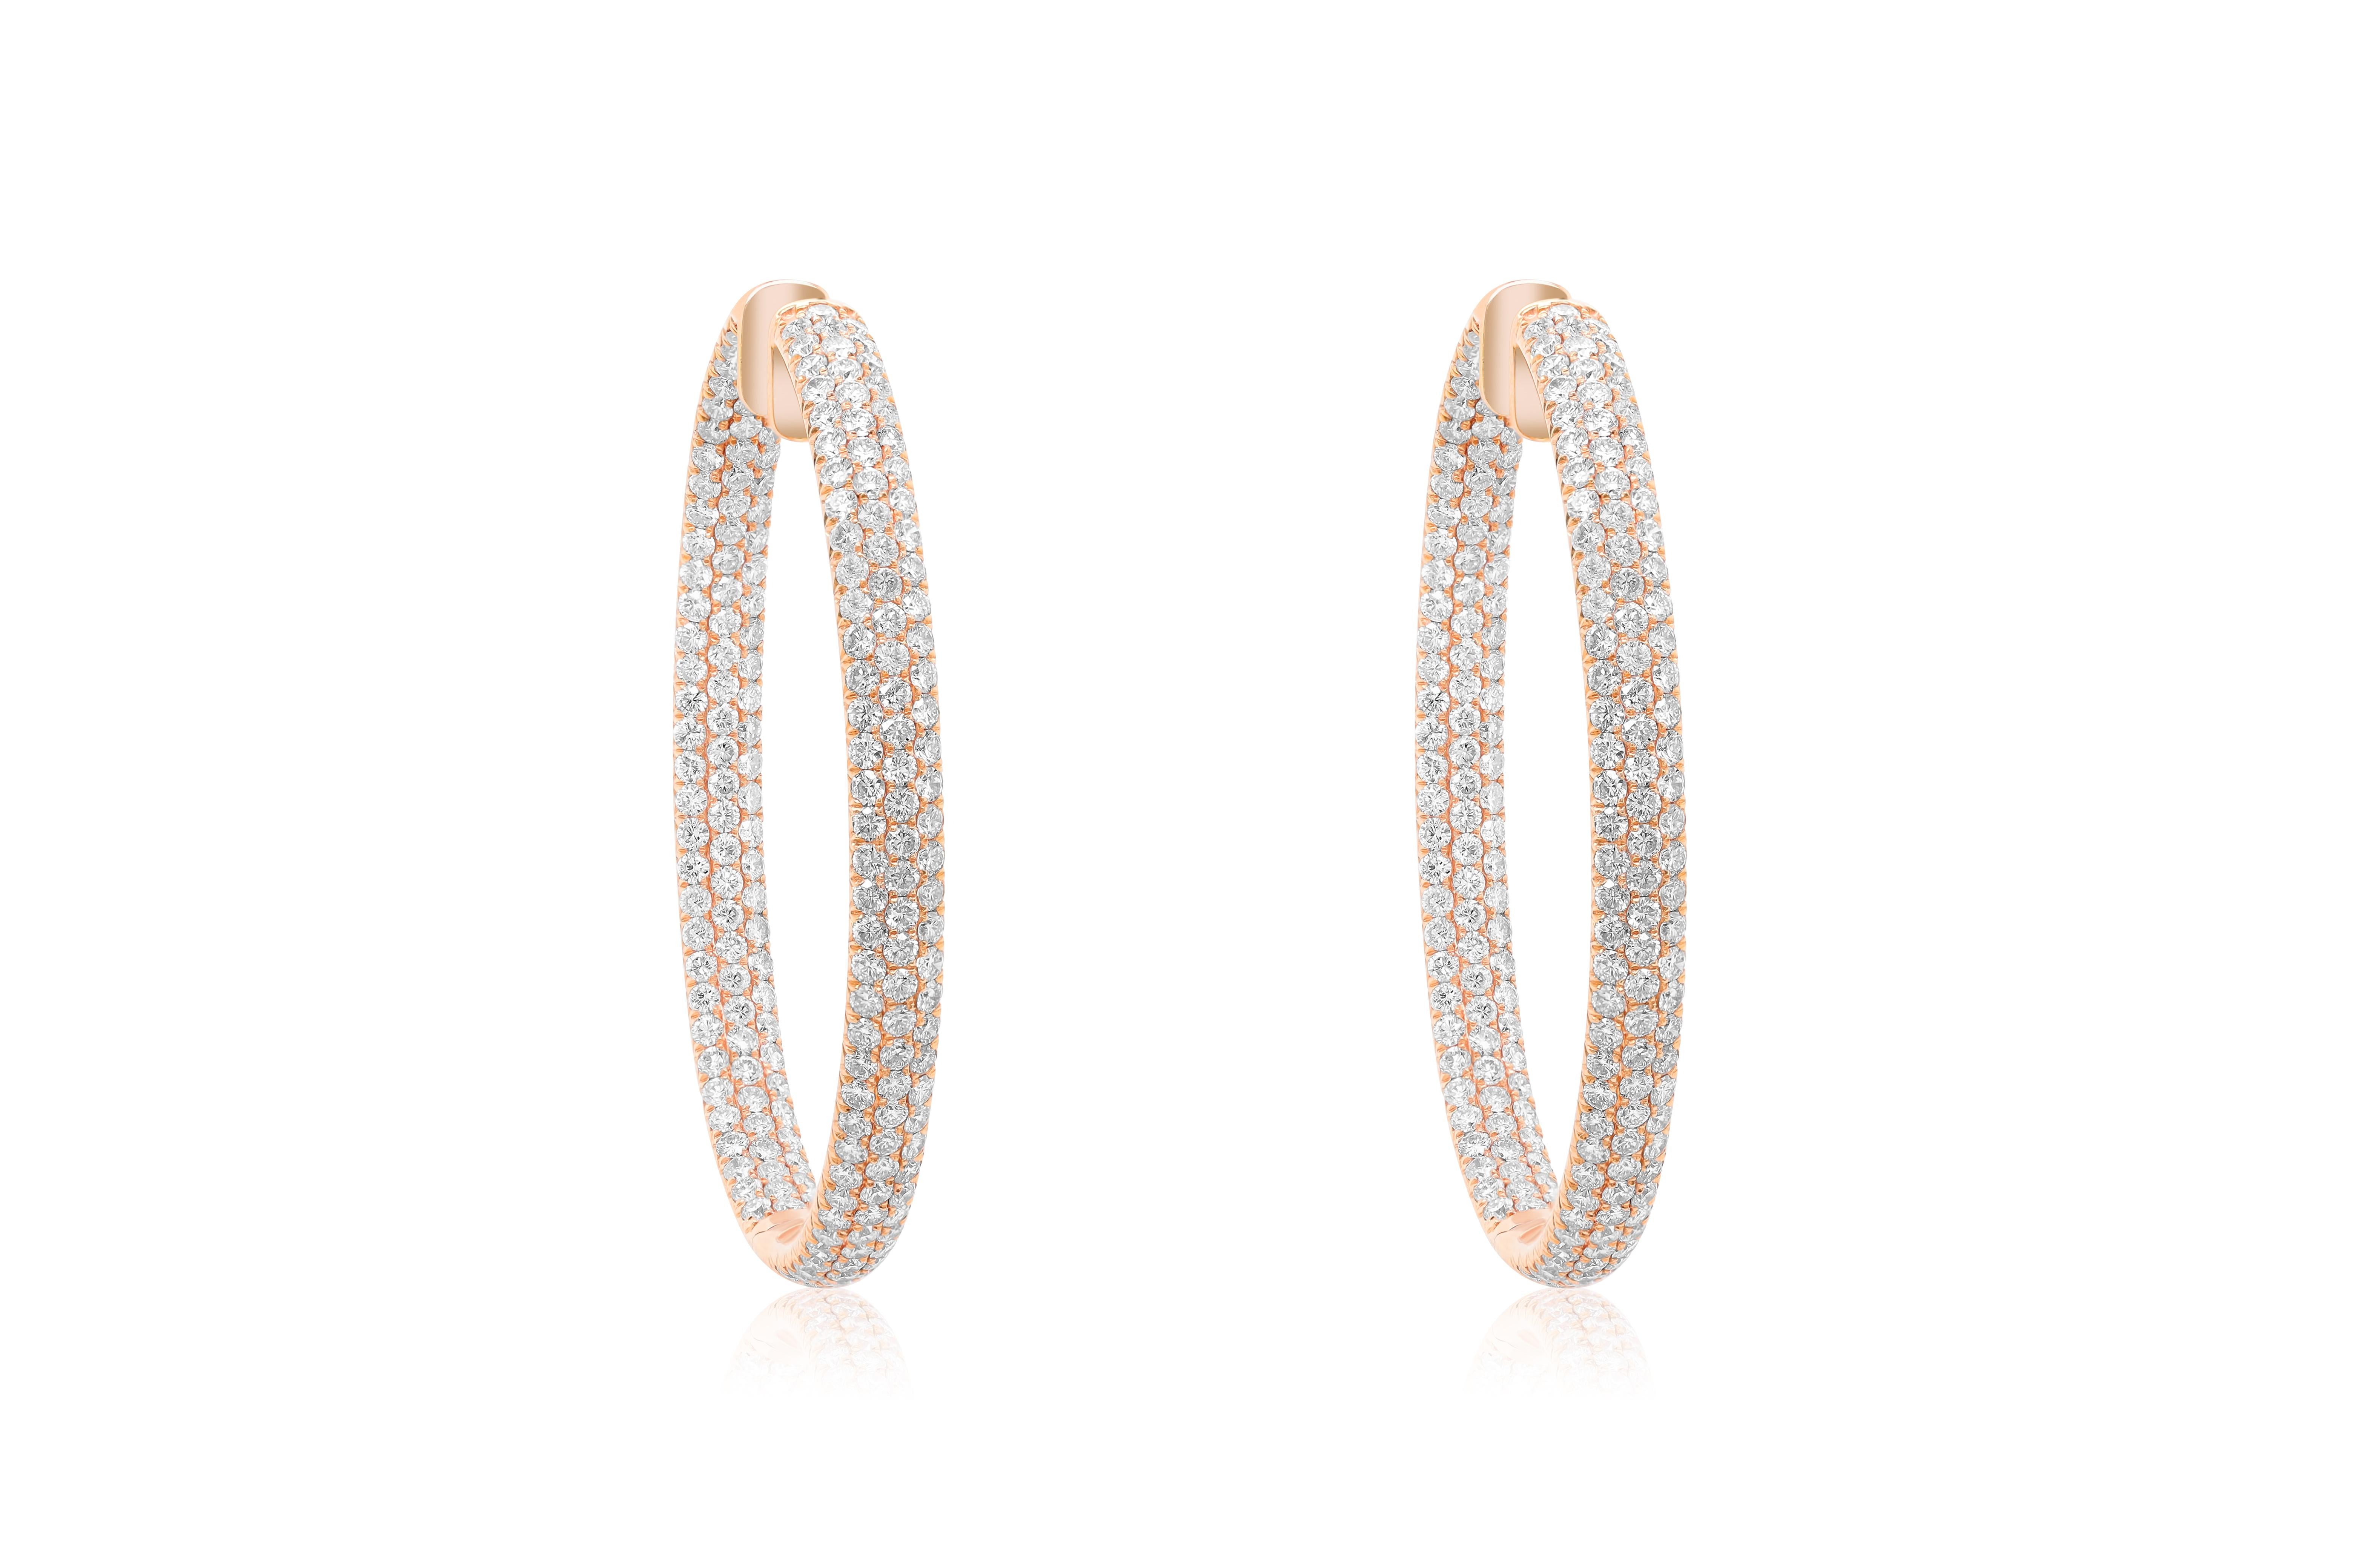 18 kt yellow gold inside-out hoop earrings adorned with 3 rows of 11.30 cts tw of diamonds.
Diana M. is a leading supplier of top-quality fine jewelry for over 35 years.
Diana M is one-stop shop for all your jewelry shopping, carrying line of